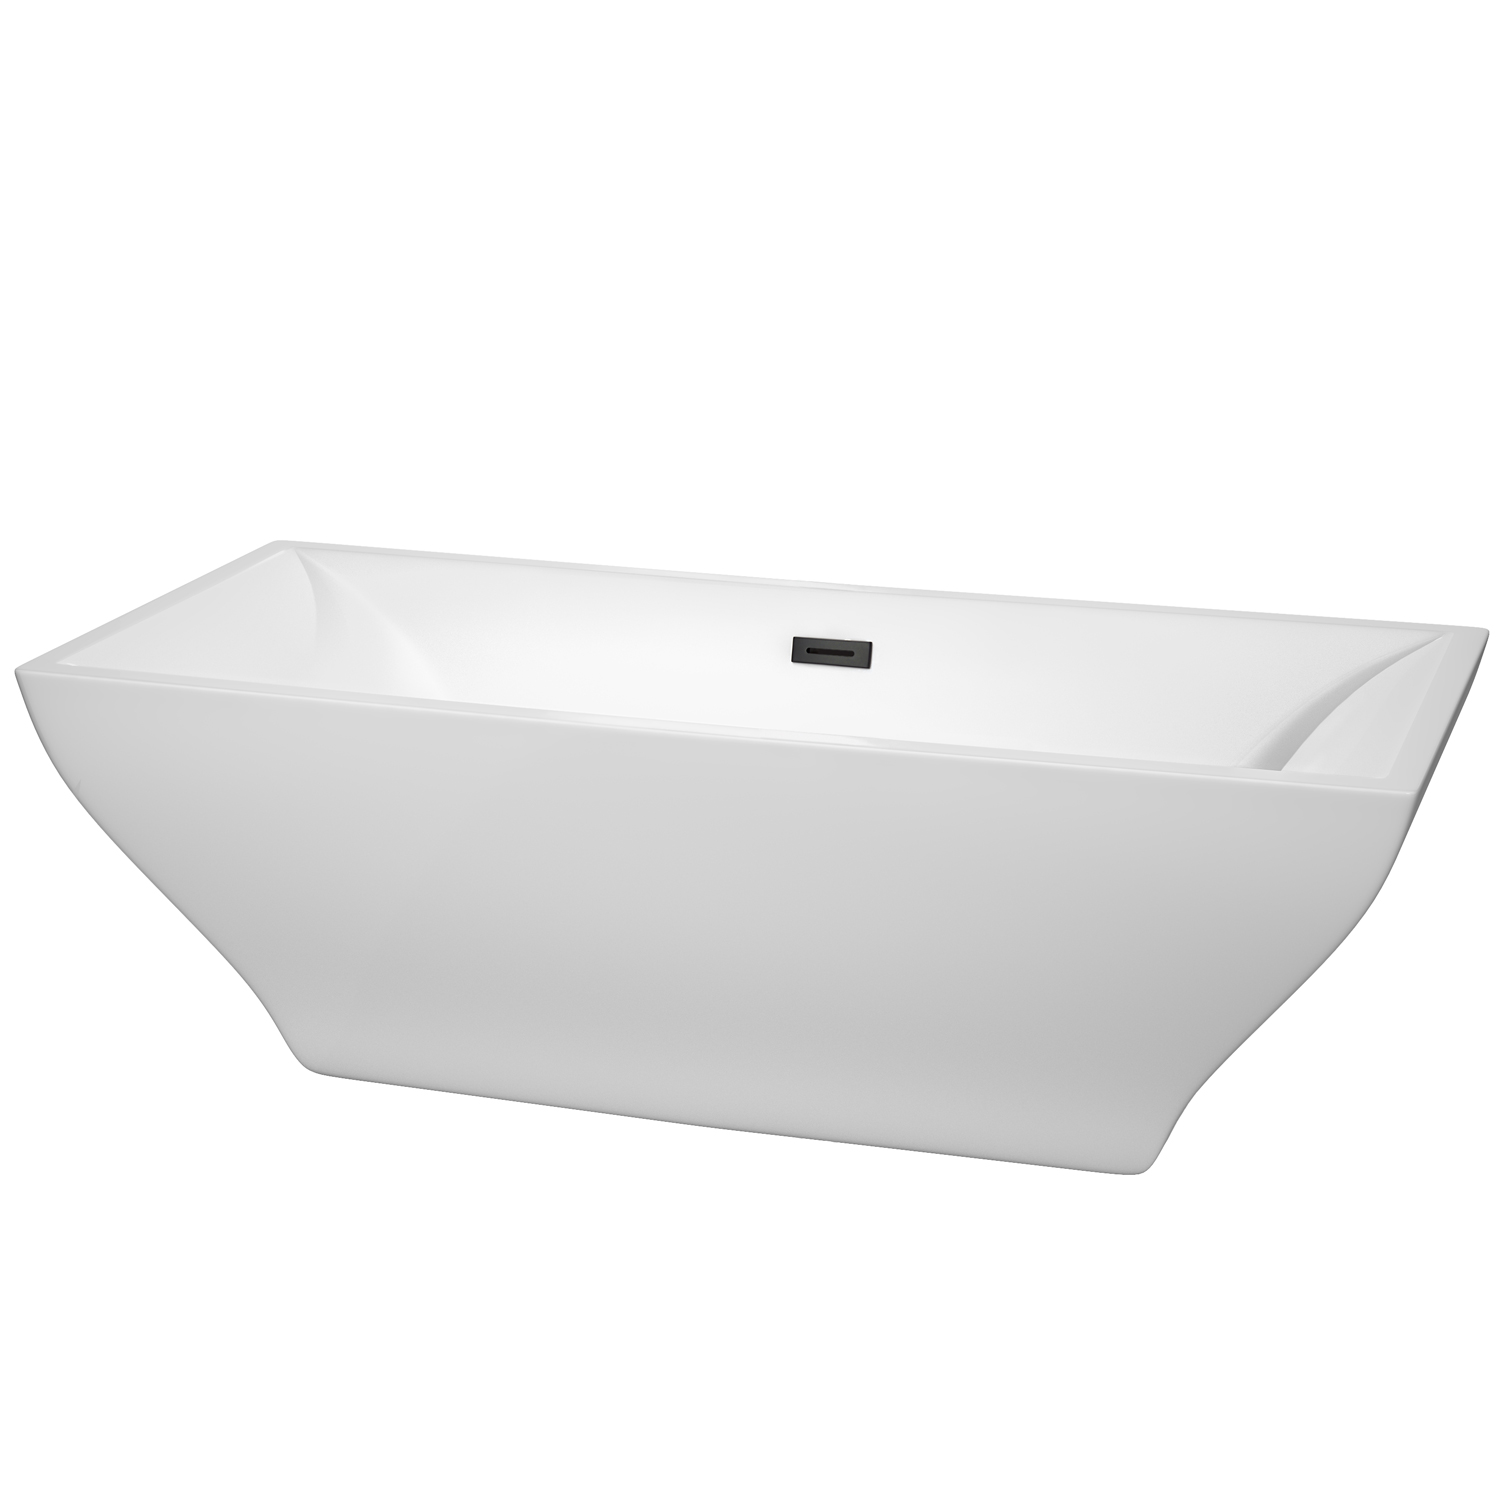 71" Freestanding Bathtub in White Finish with Matte Black Drain and Overflow Trim